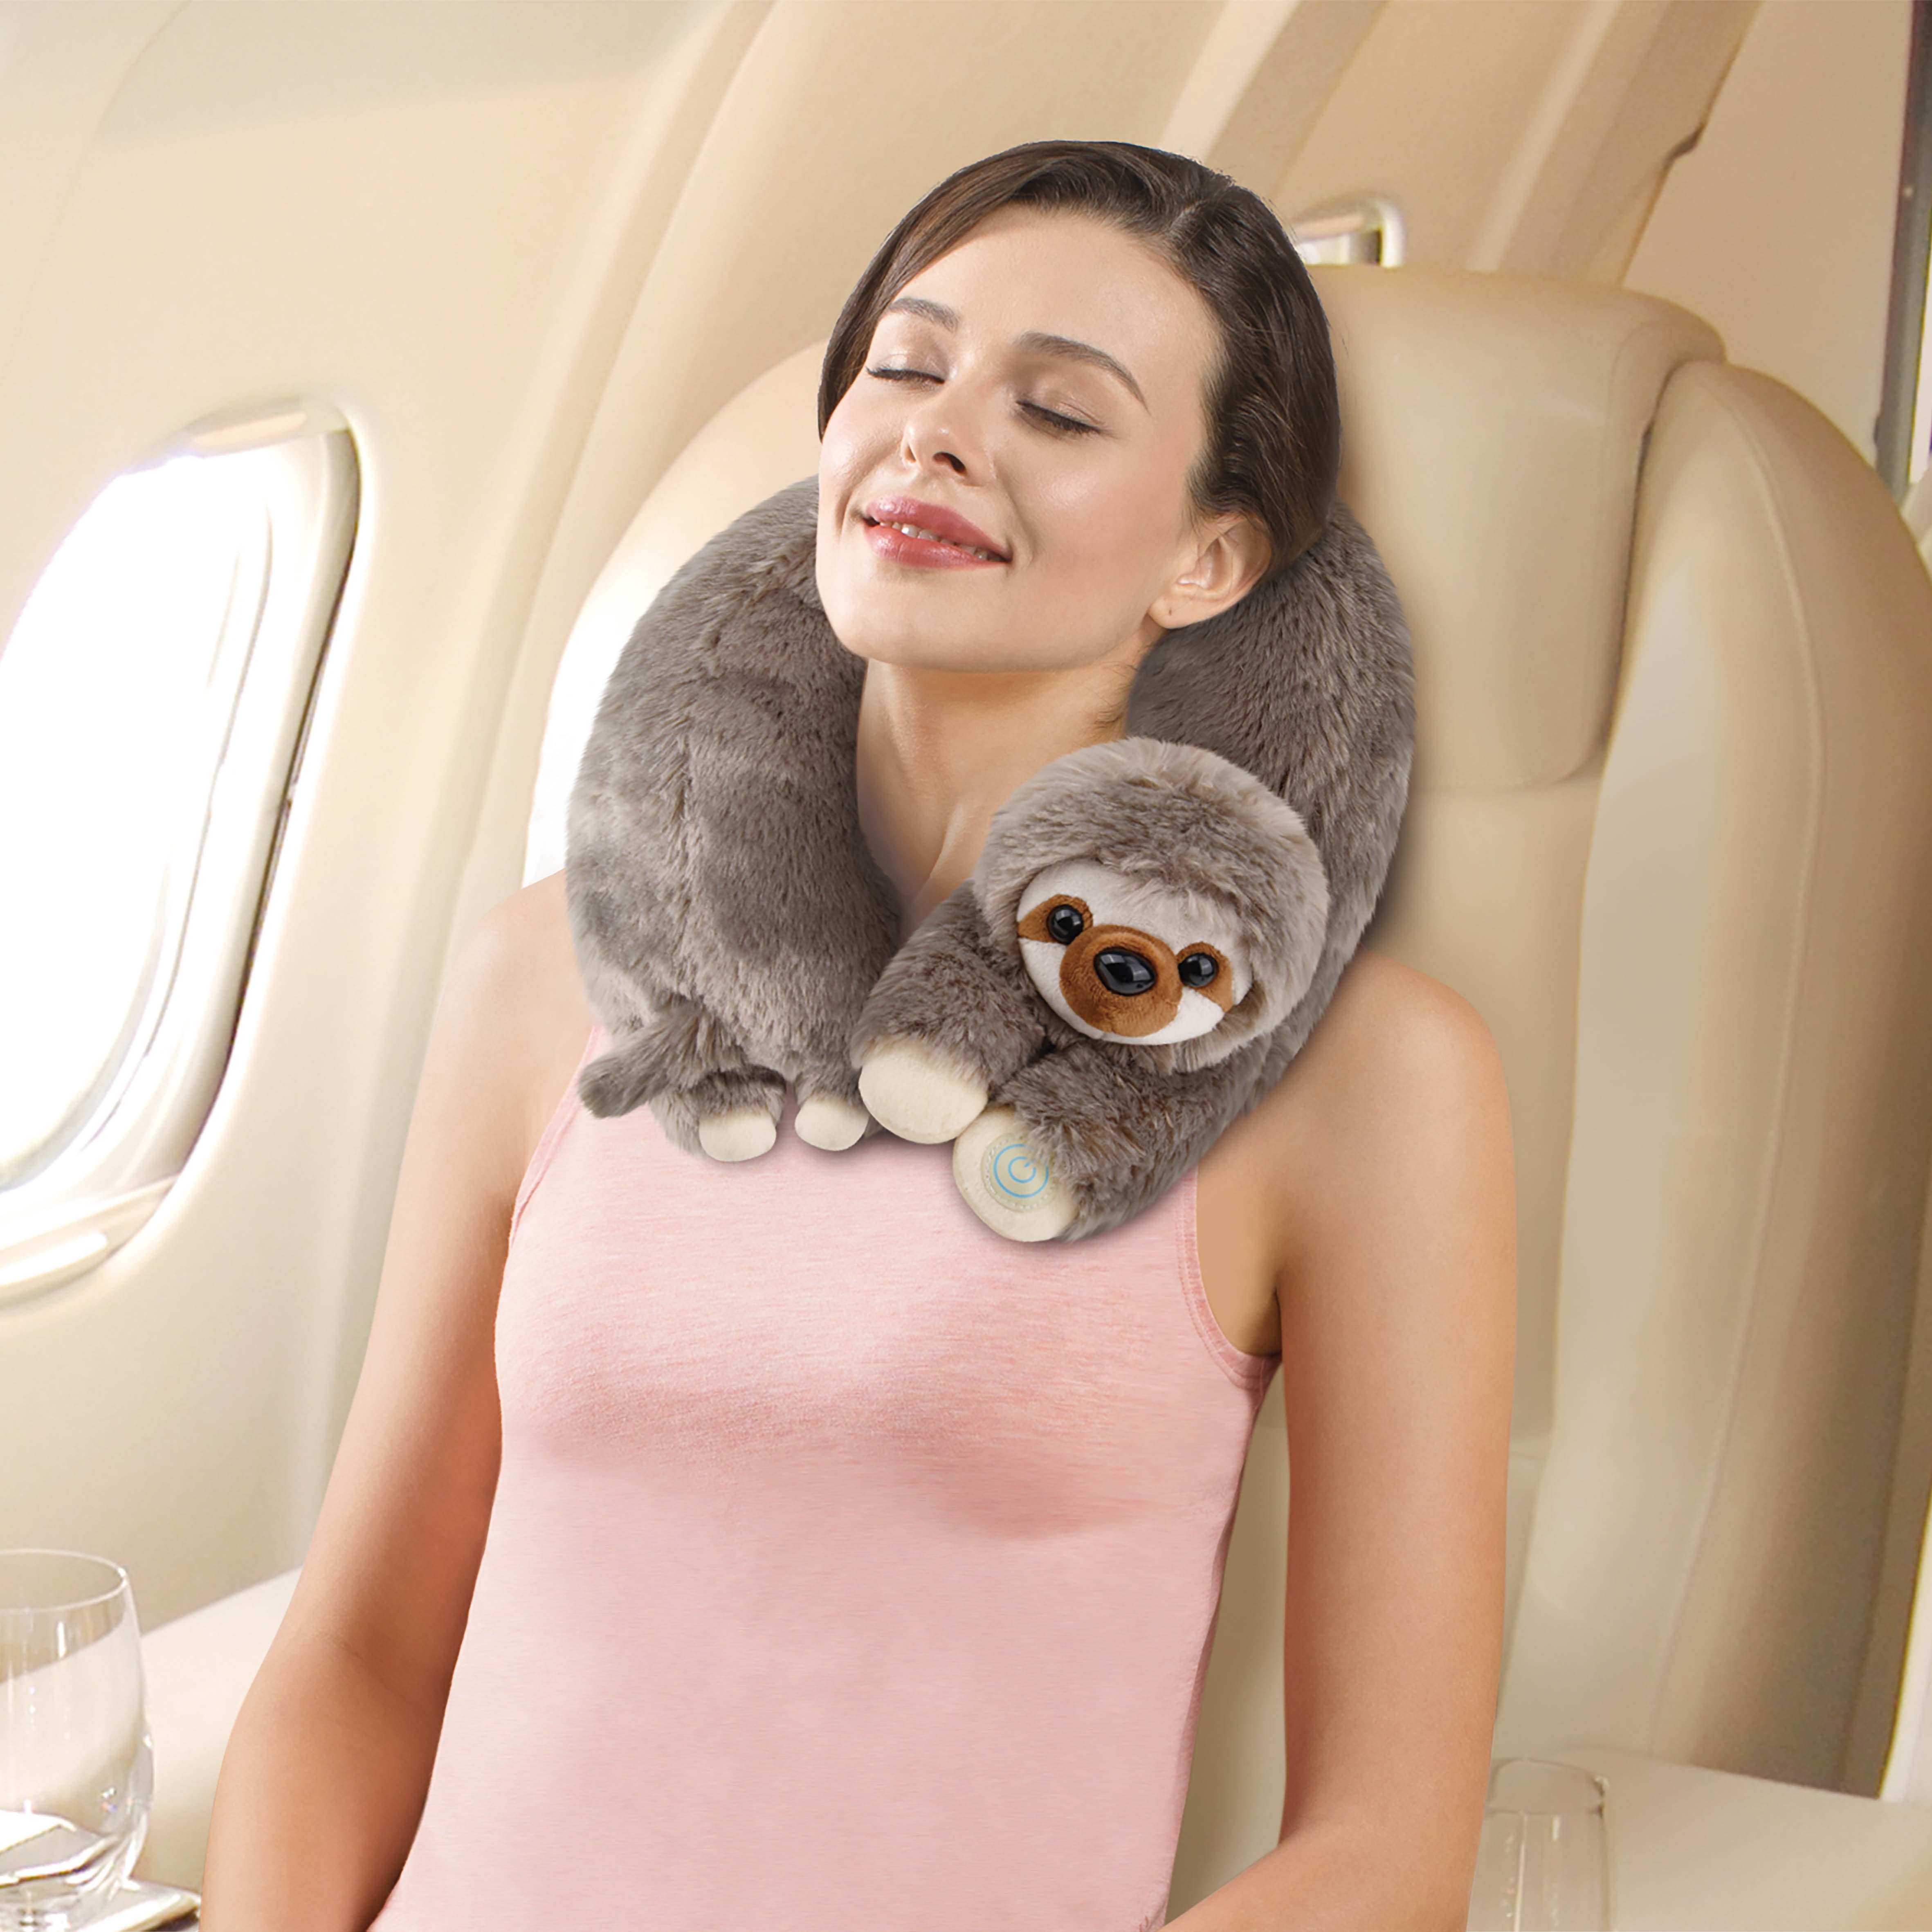 Health Touch Neck Massaging Massager Gift with Relaxing Vibration- Sloth